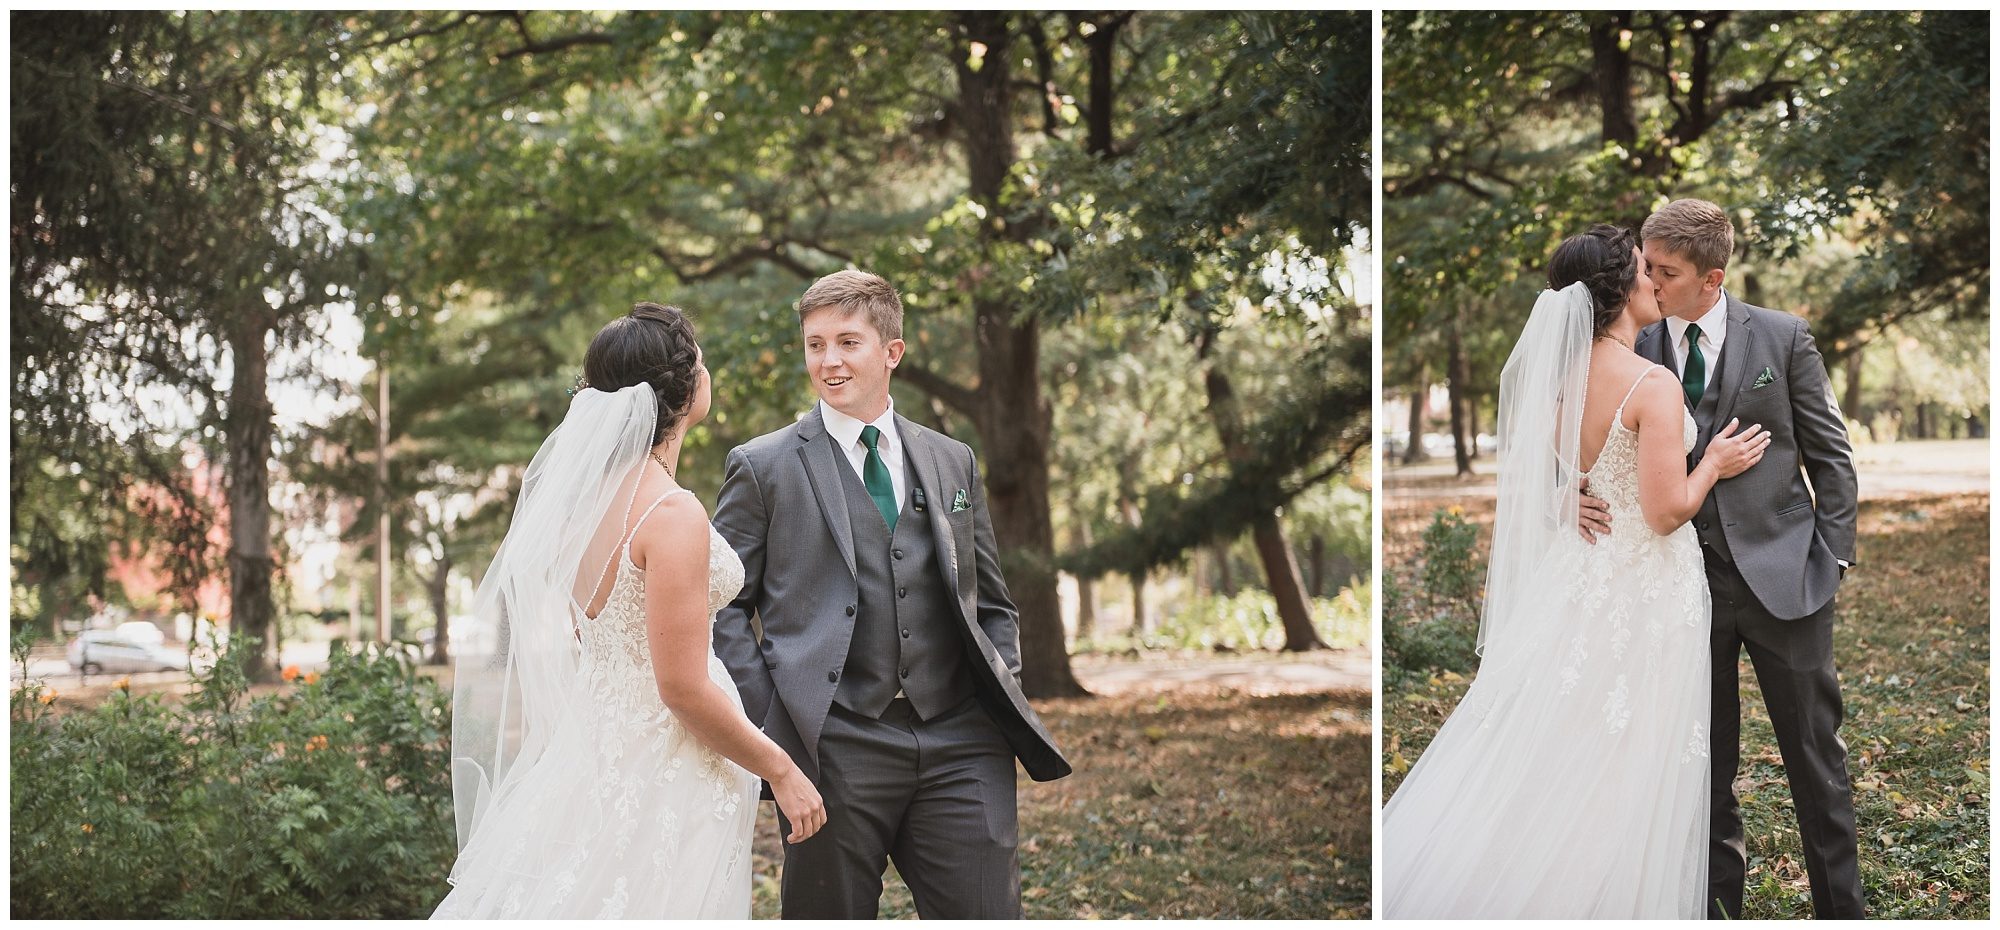 Groom sees bride for first time at Lafayette Square Park